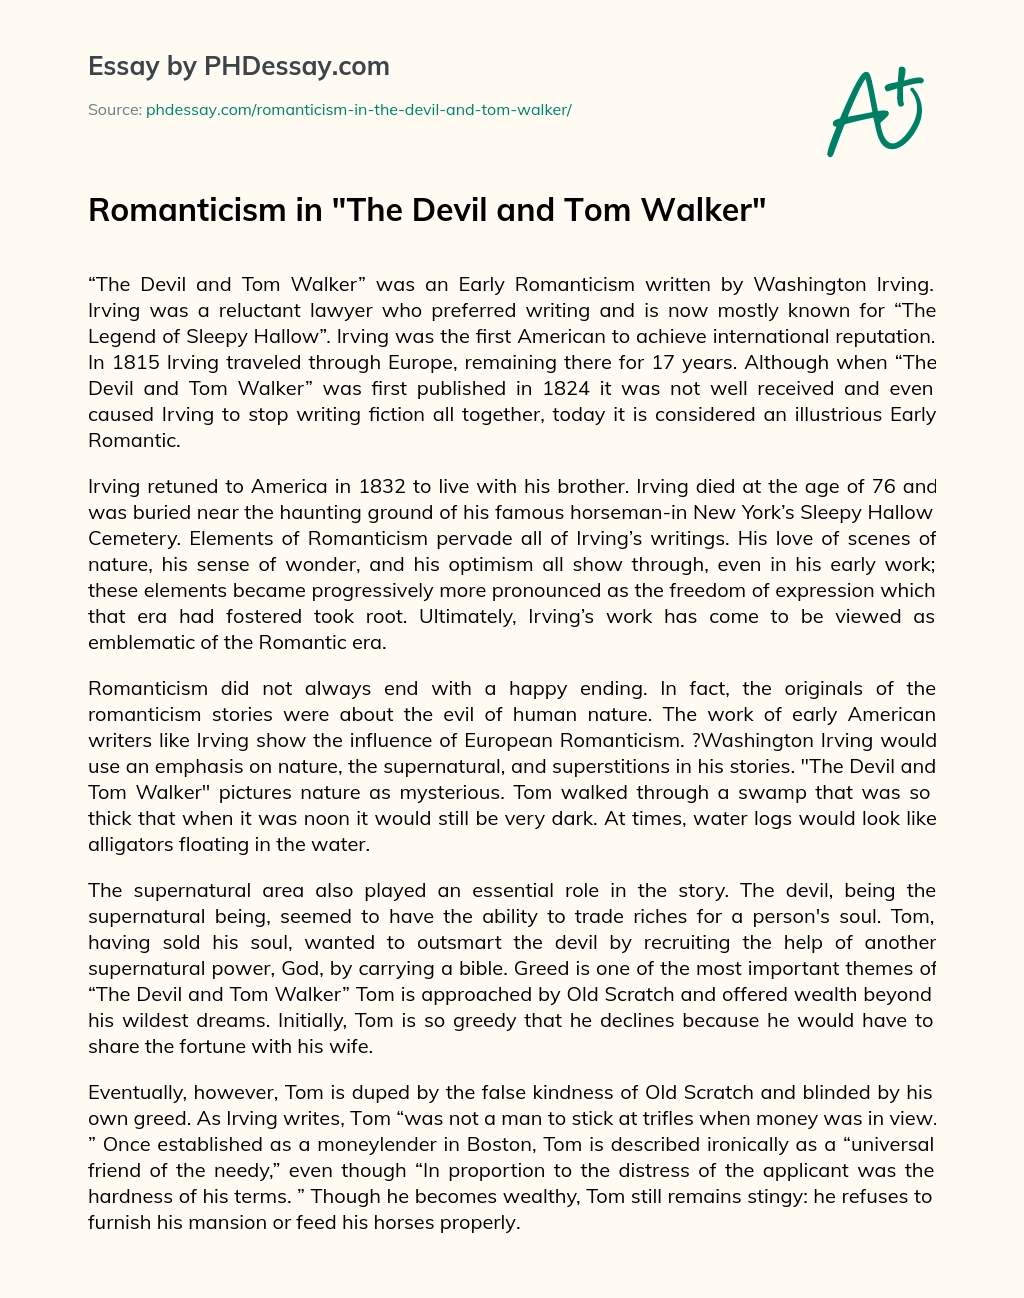 Romanticism in The Devil and Tom Walker essay